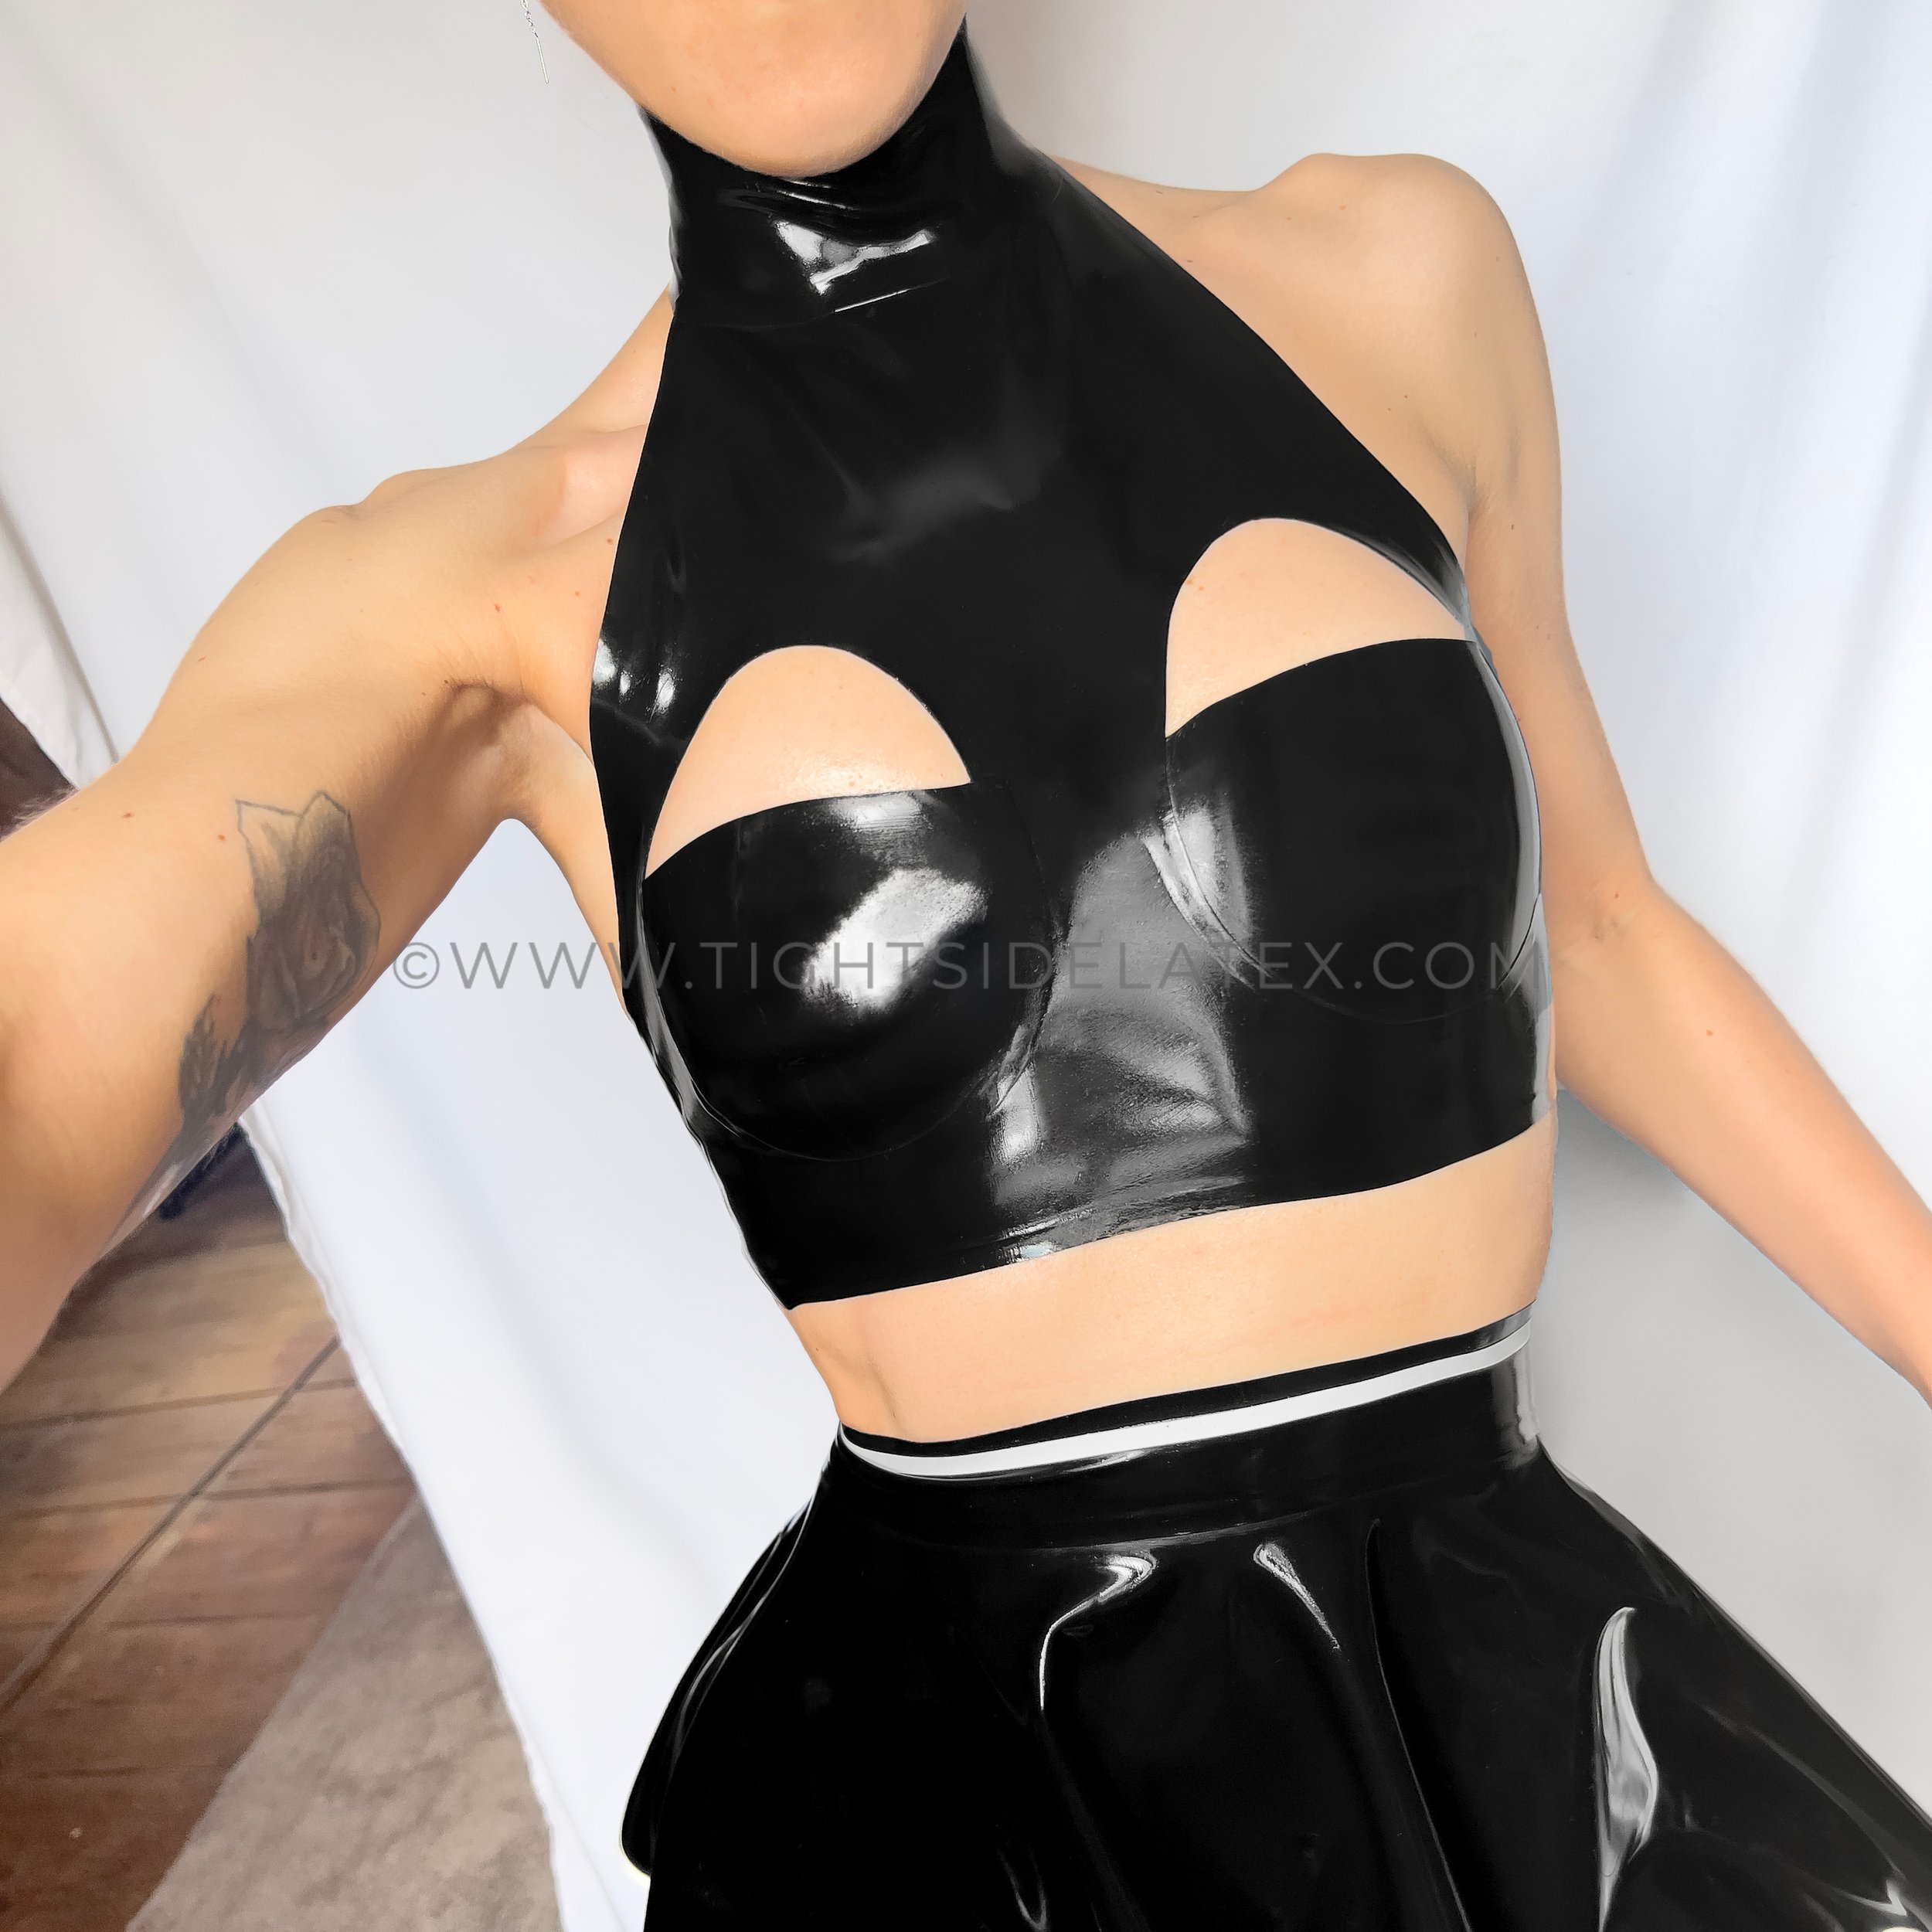 Latex Top With Perforated Back - Tight Side Latex